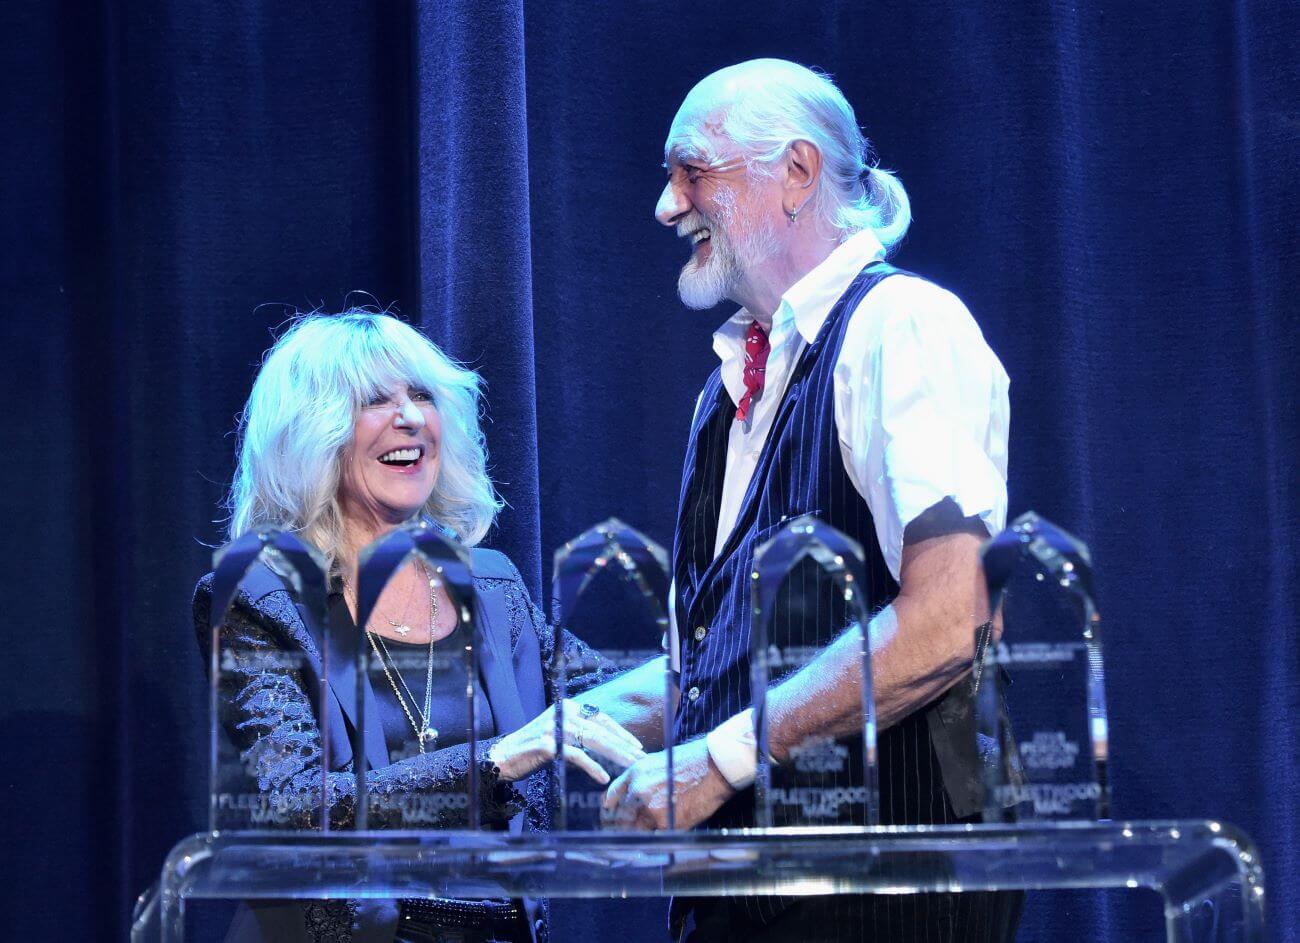 Christine McVie and Mick Fleetwood stand behind a podium laughing together.